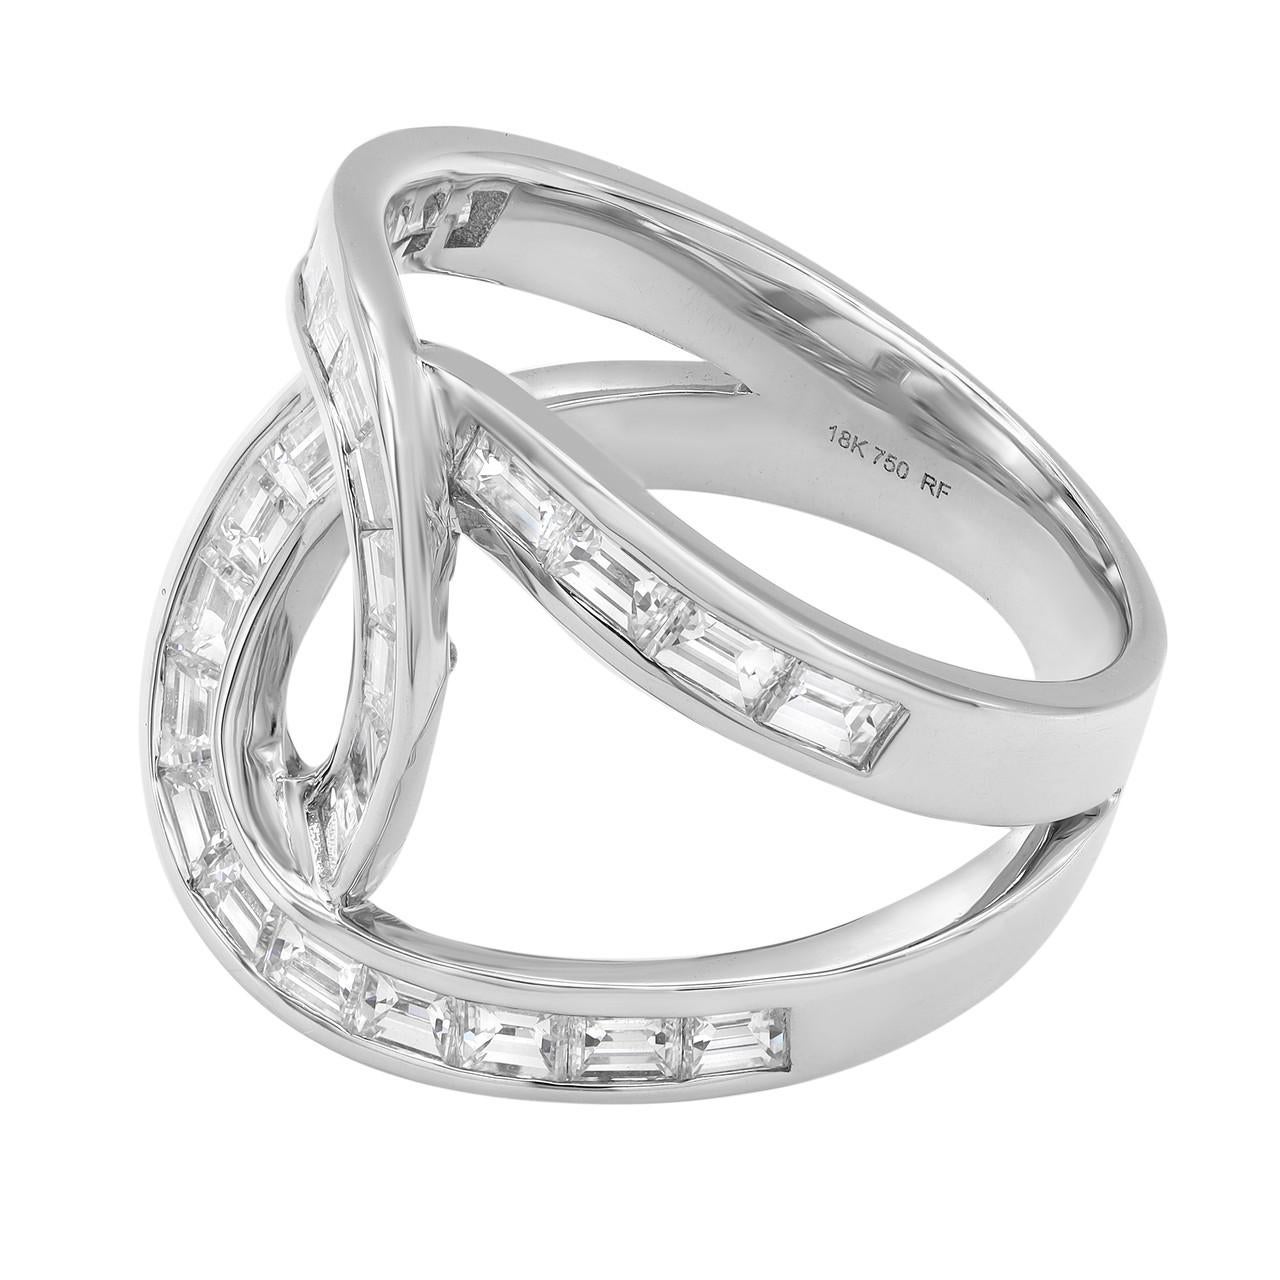 Make a bold statement with the Diamond Baguette Interwoven Statement Ring in 18K White Gold. This exquisite ring showcases the beauty of modern tapered baguettes in a mesmerizing interwoven design. Crafted with meticulous attention to detail in